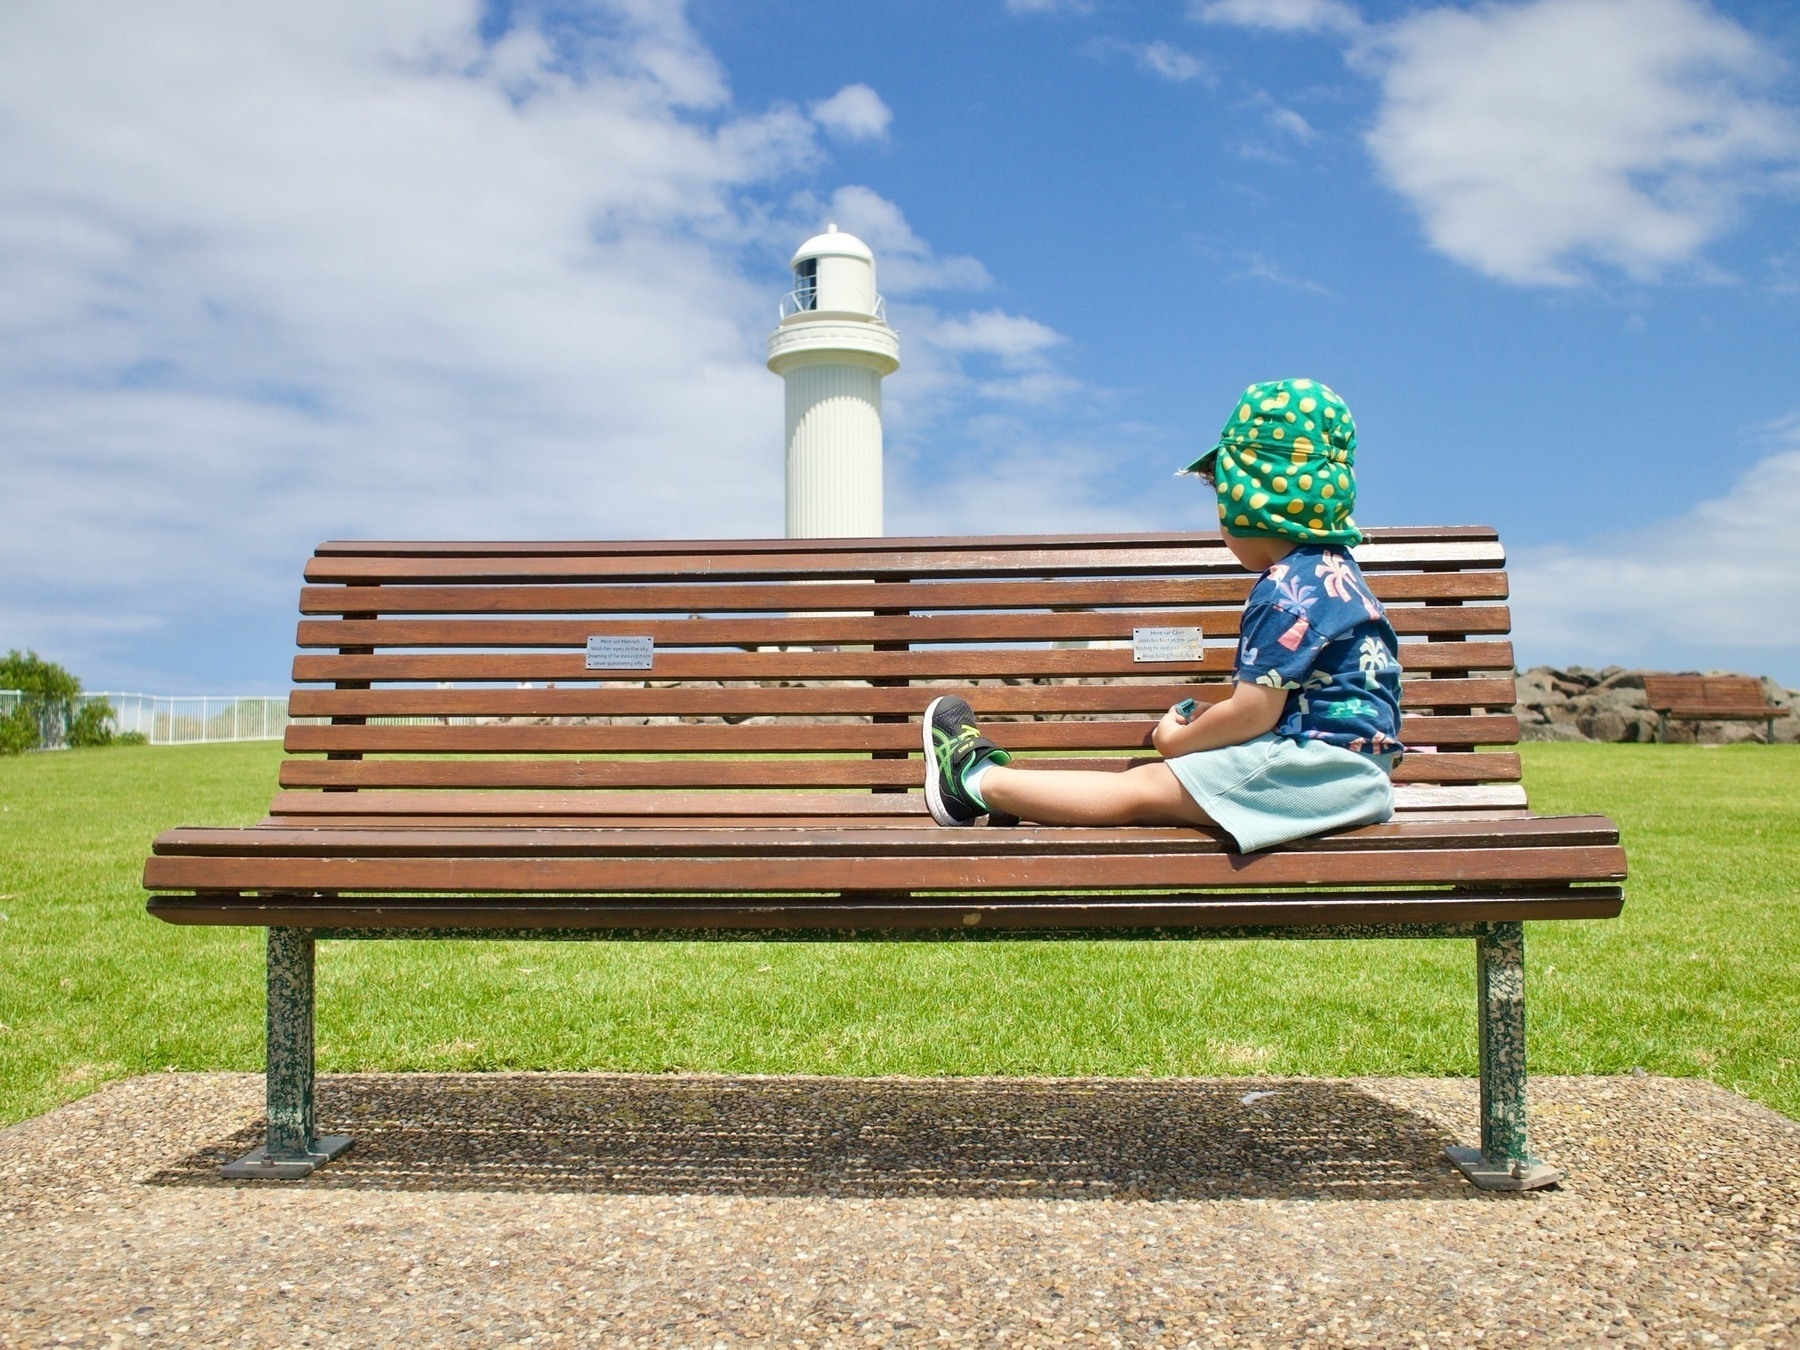 A toddler with a Dorothy the Dinosaur hat sits on a park bench in front of the lighthouse on Flagstaff Hill.